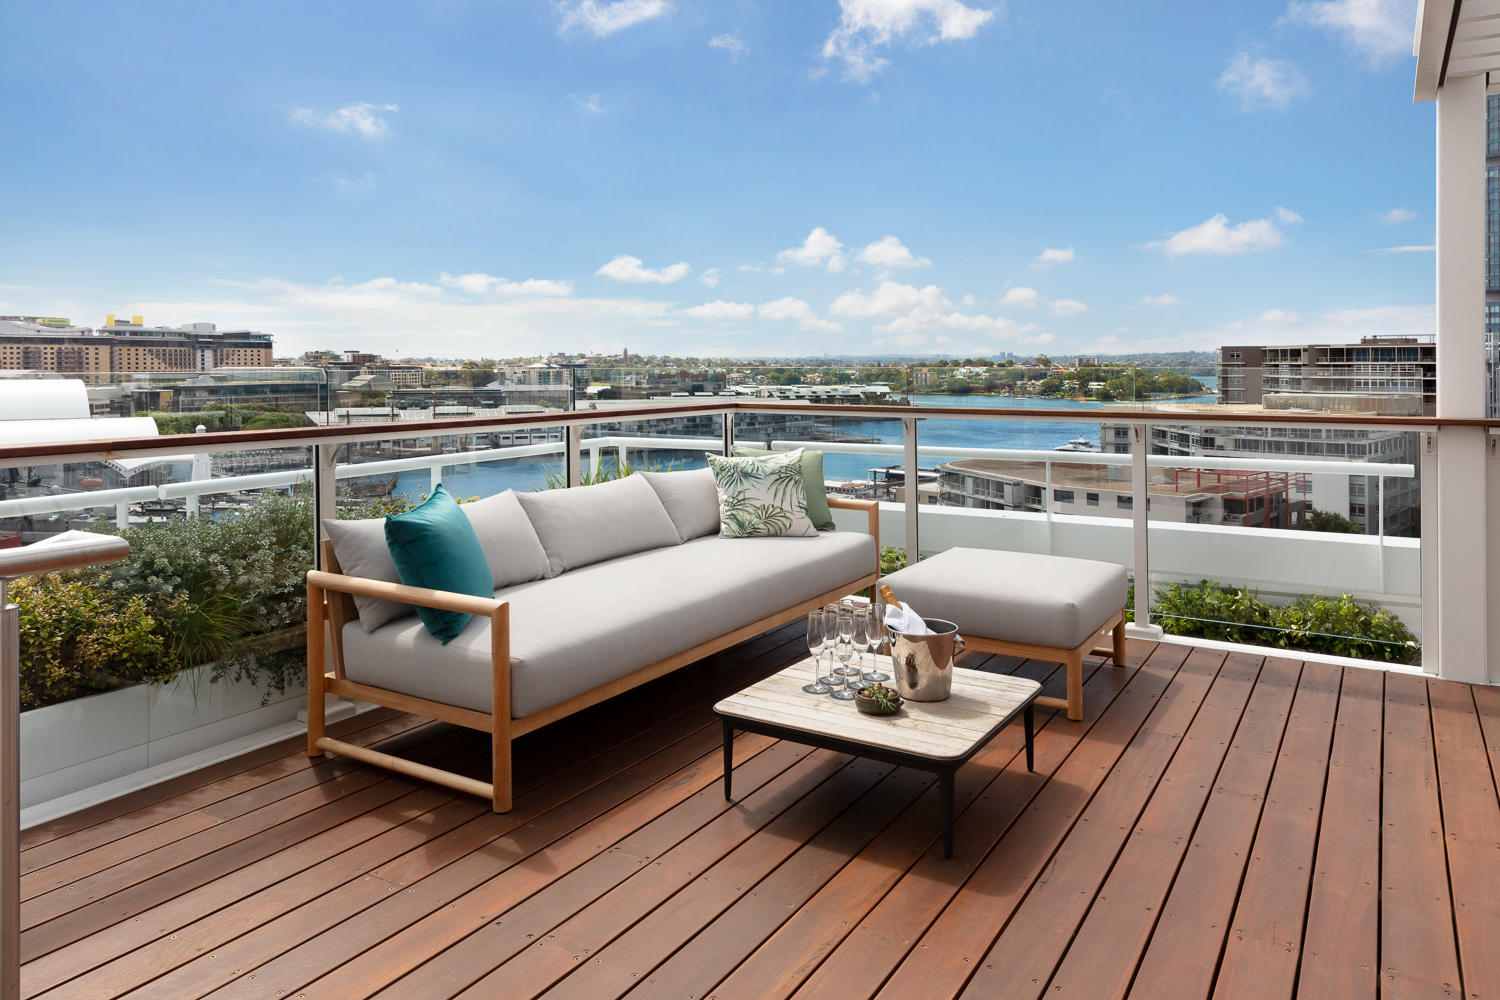 For lounging and looking or sipping and savouring, the outdoor terrace in both the Sydney Terrace Su